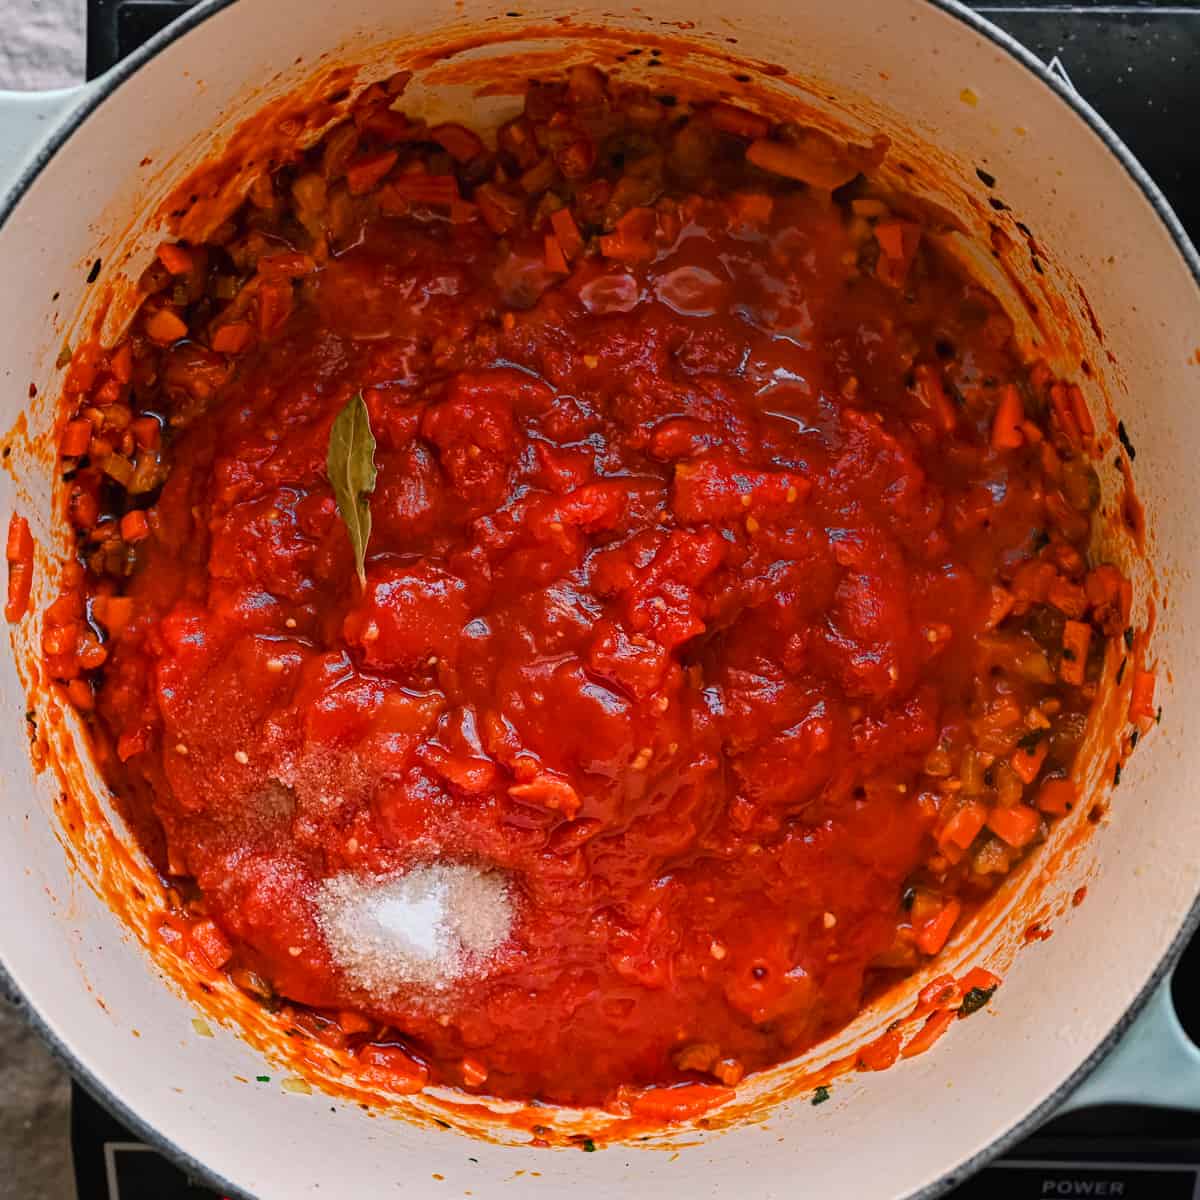 crushed tomatoes and salt sitting on top of carrots for Italian stew